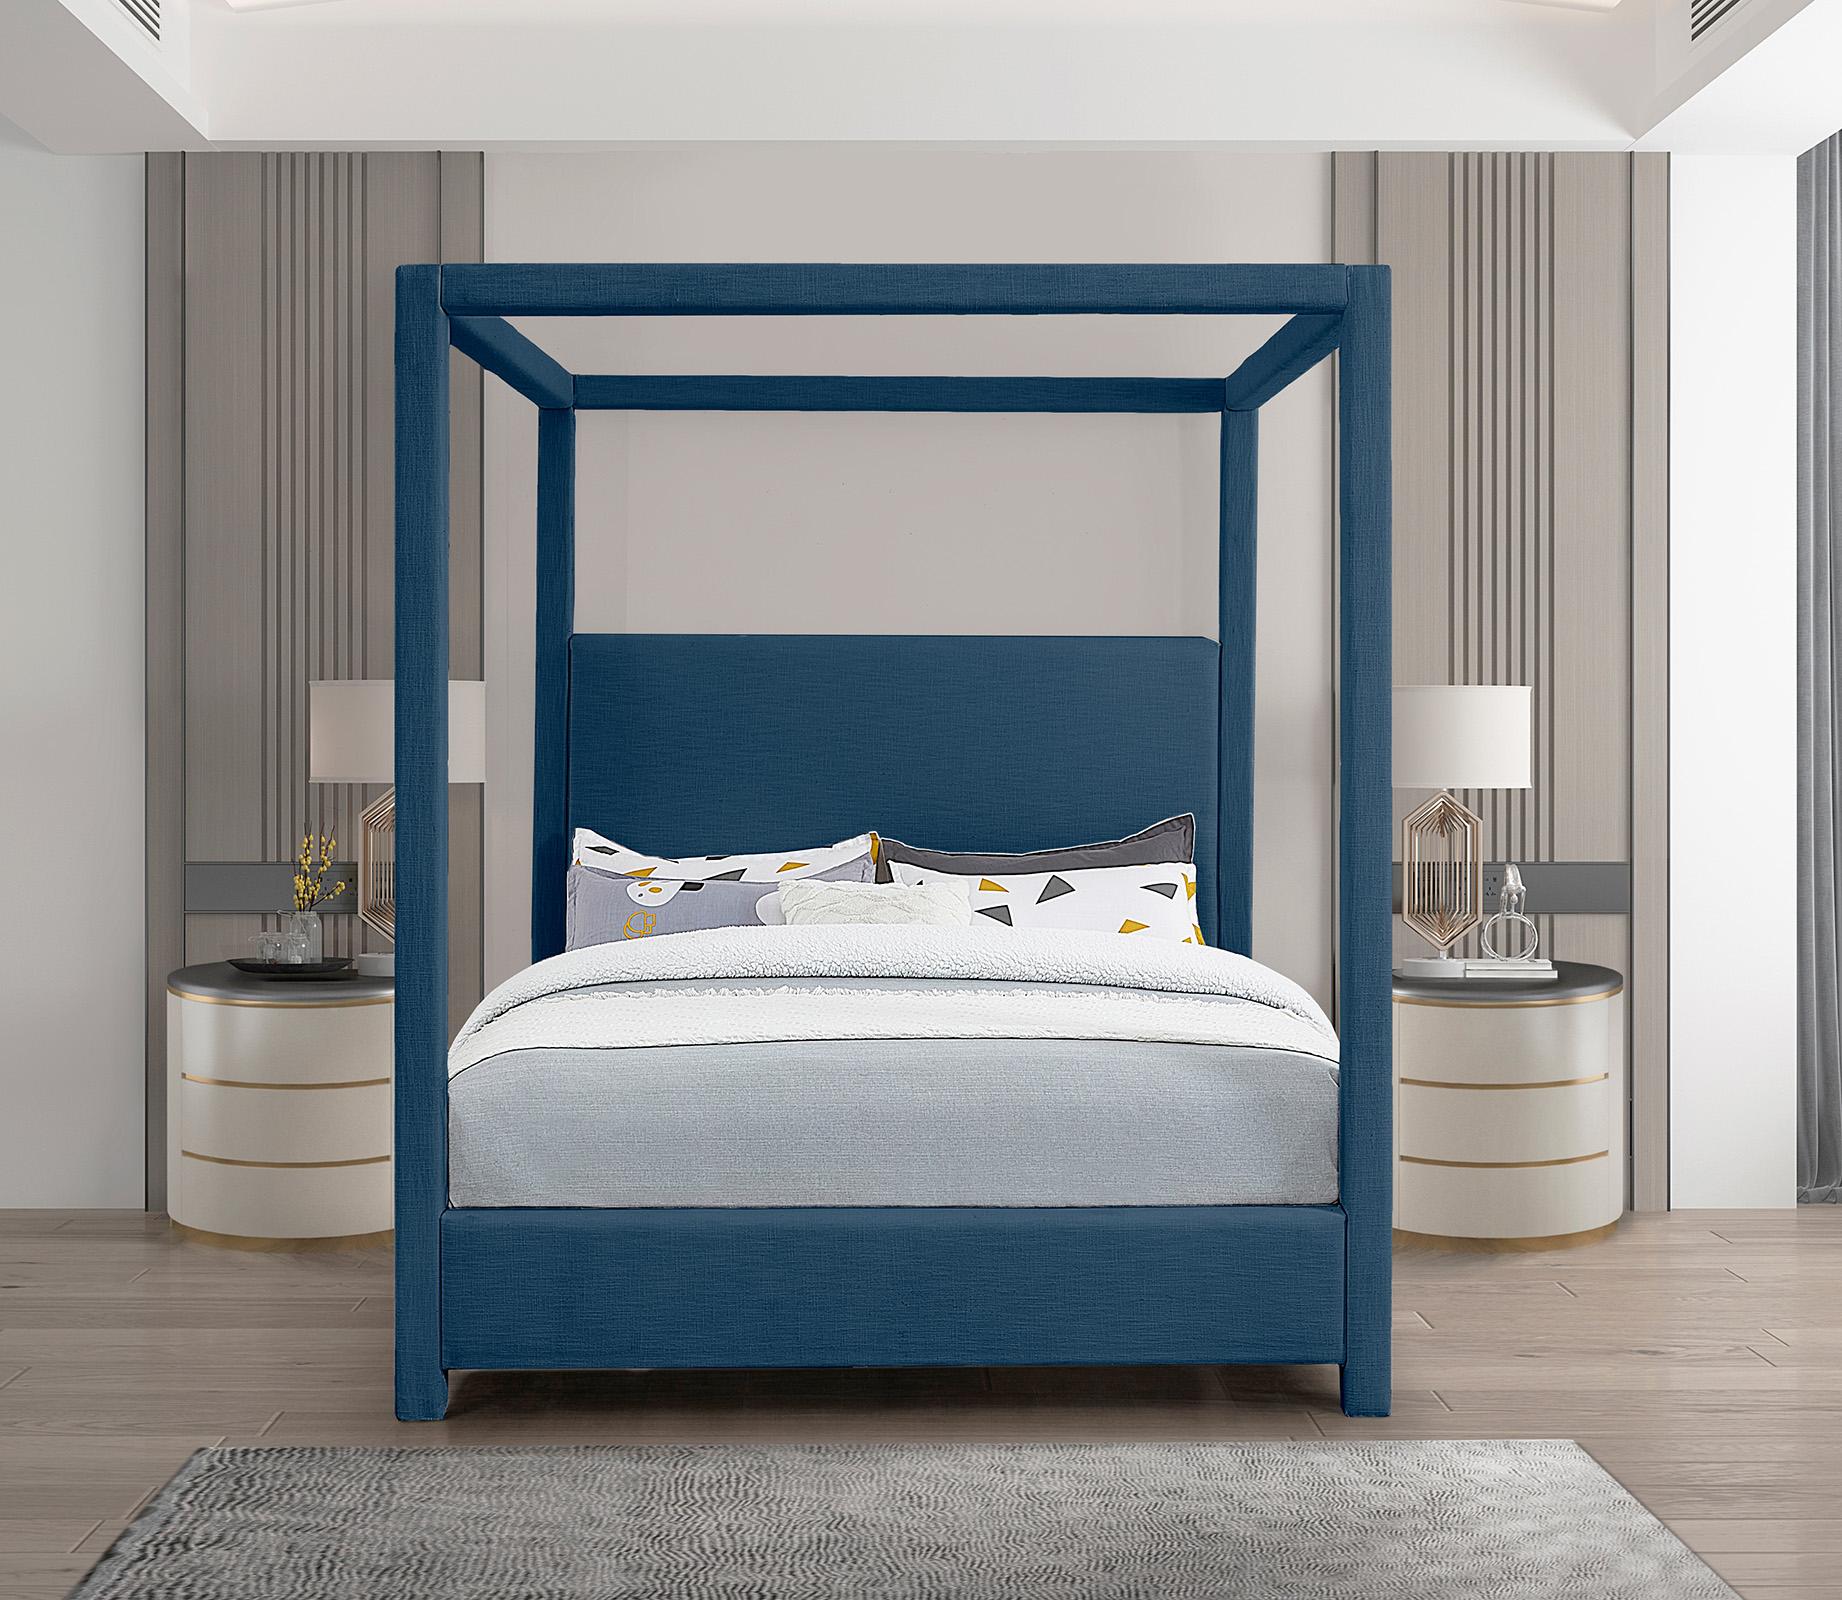 

    
Meridian Furniture EmersonNavy-Q Canopy Bed Navy EmersonNavy-Q
